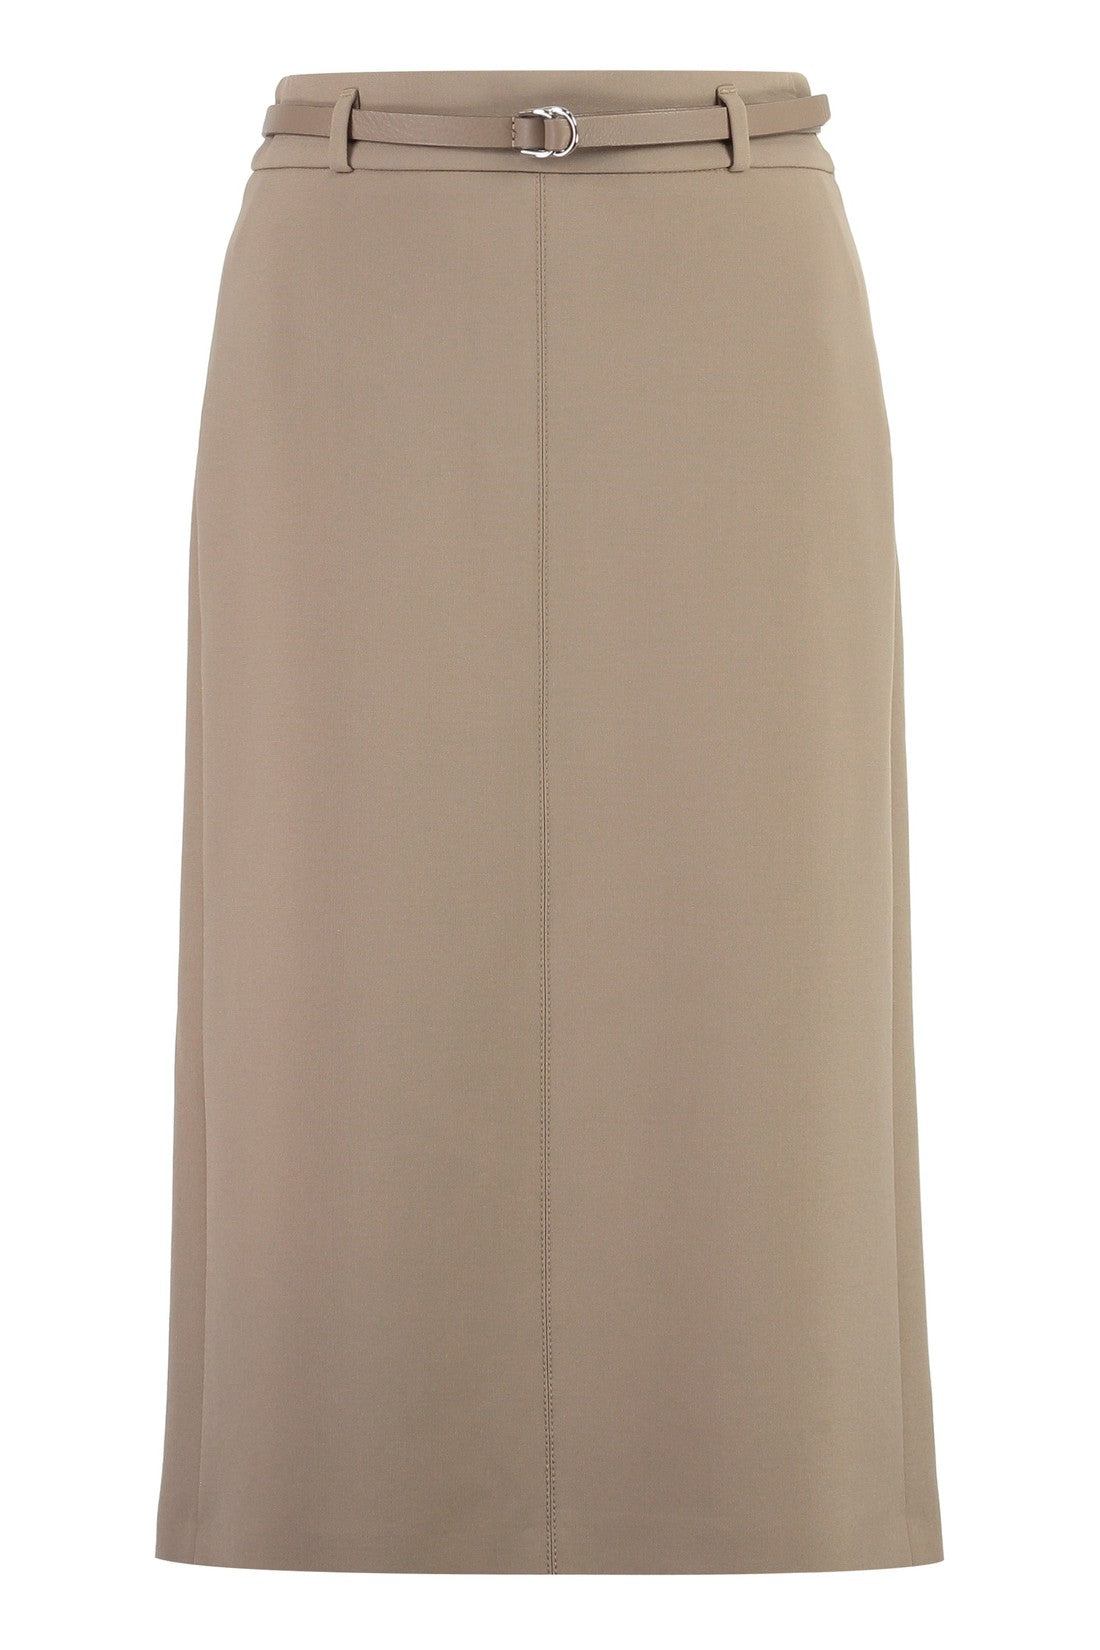 Peserico-OUTLET-SALE-Stretch pencil skirt-ARCHIVIST